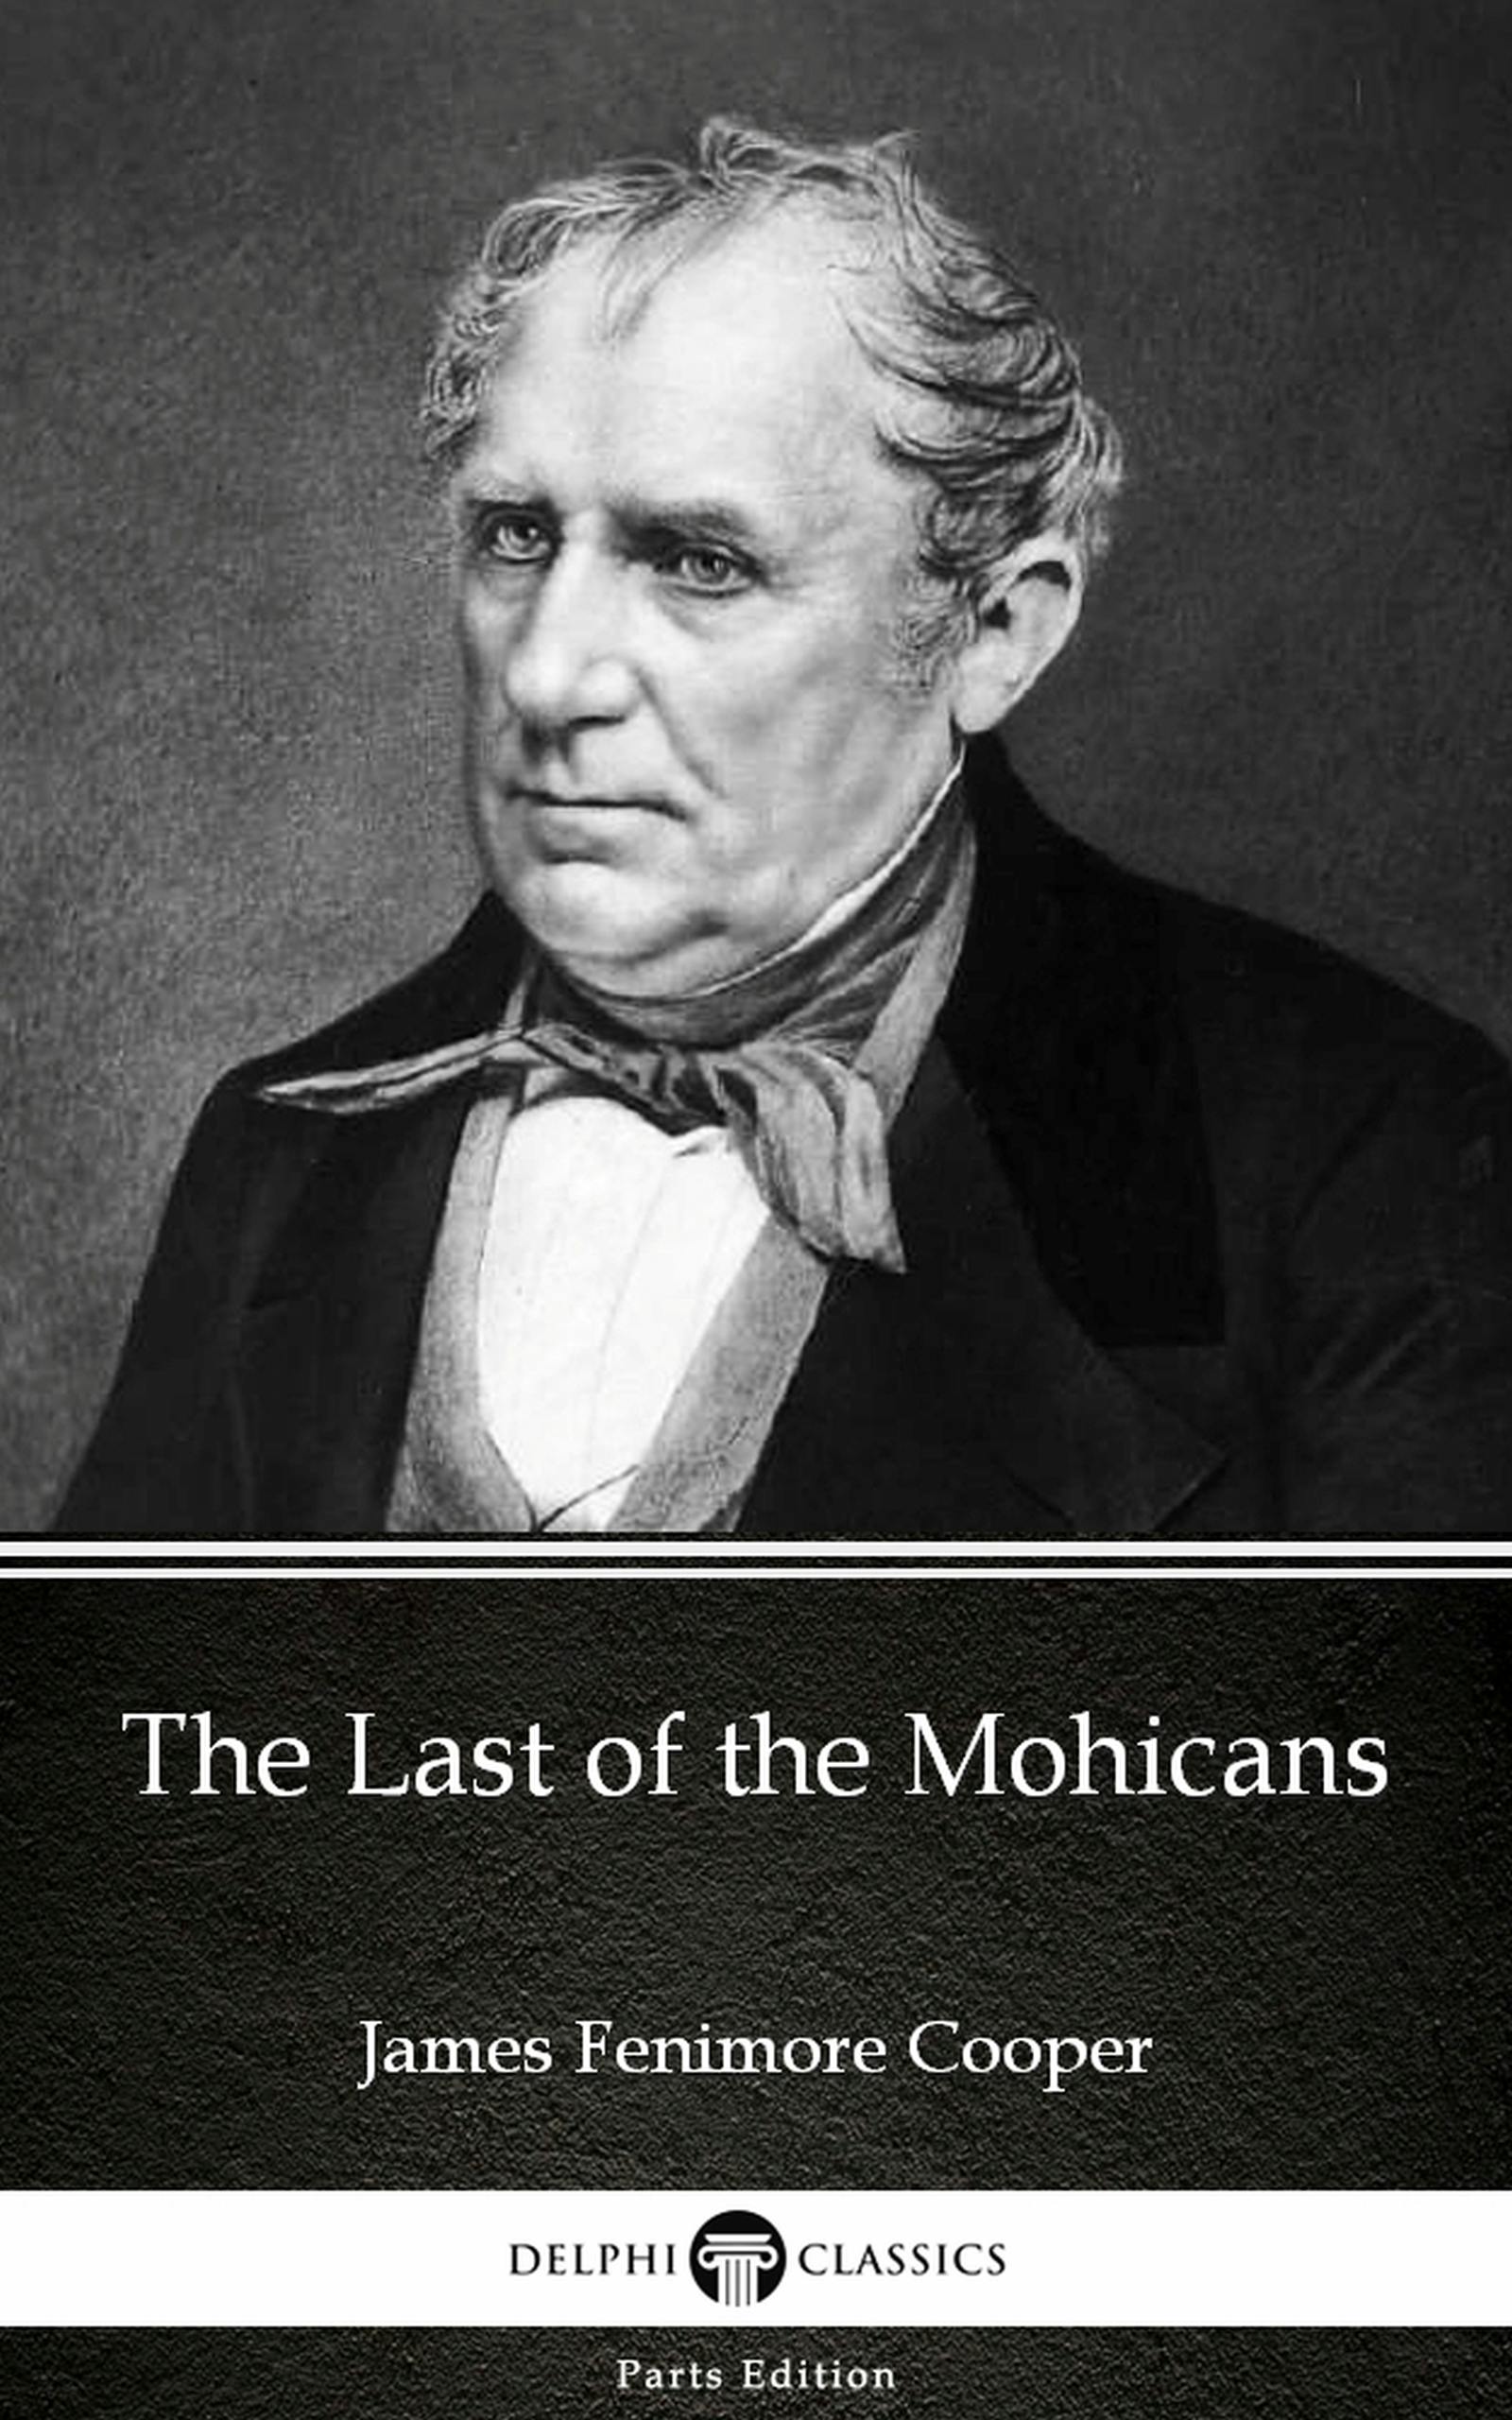 The Last of the Mohicans by James Fenimore Cooper - Delphi Classics (Illustrated) - James Fenimore Cooper